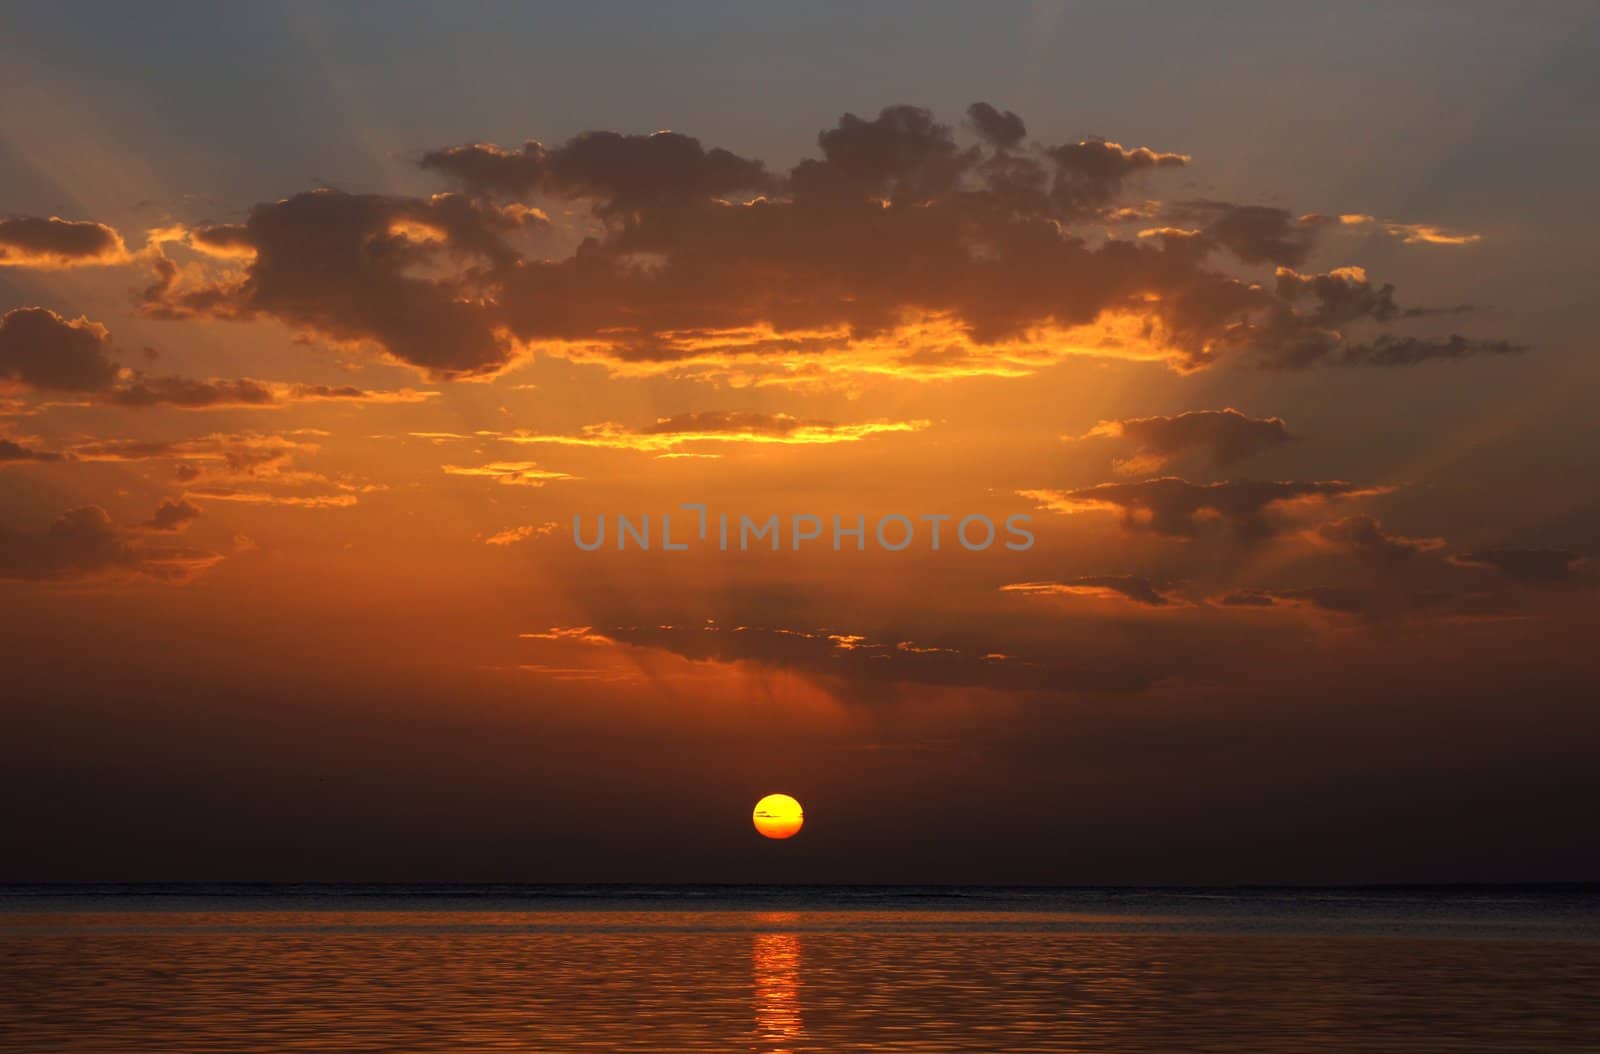 Sunrising over the Red sea in Egypt by Elet